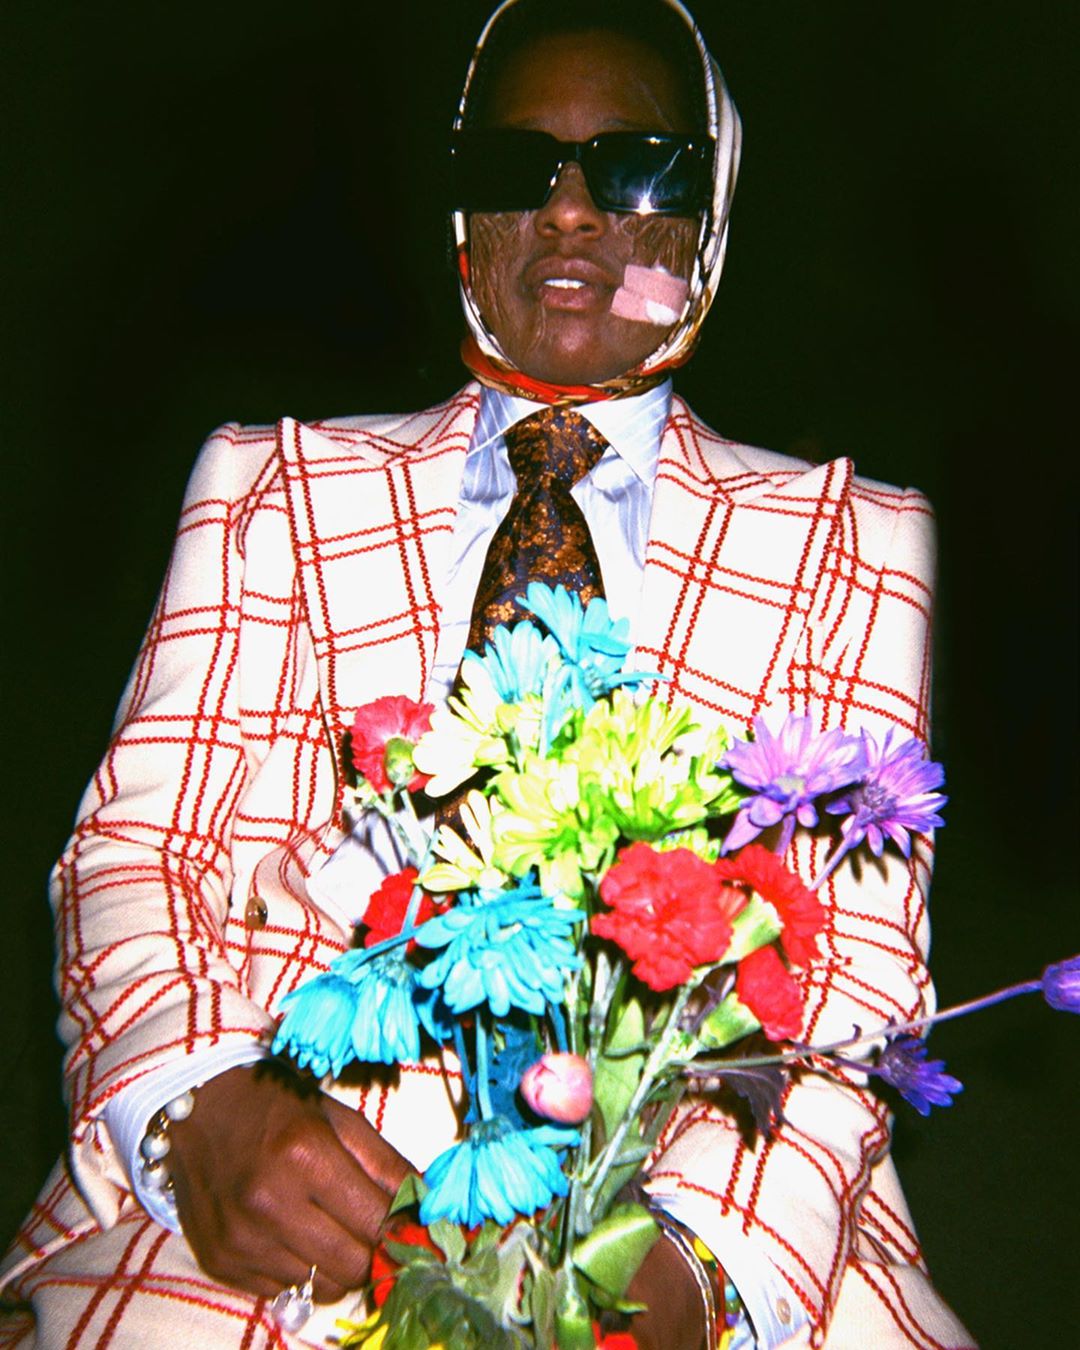 SPOTTED: A$AP Rocky in Gucci for Upcoming BabushkaBoi Video